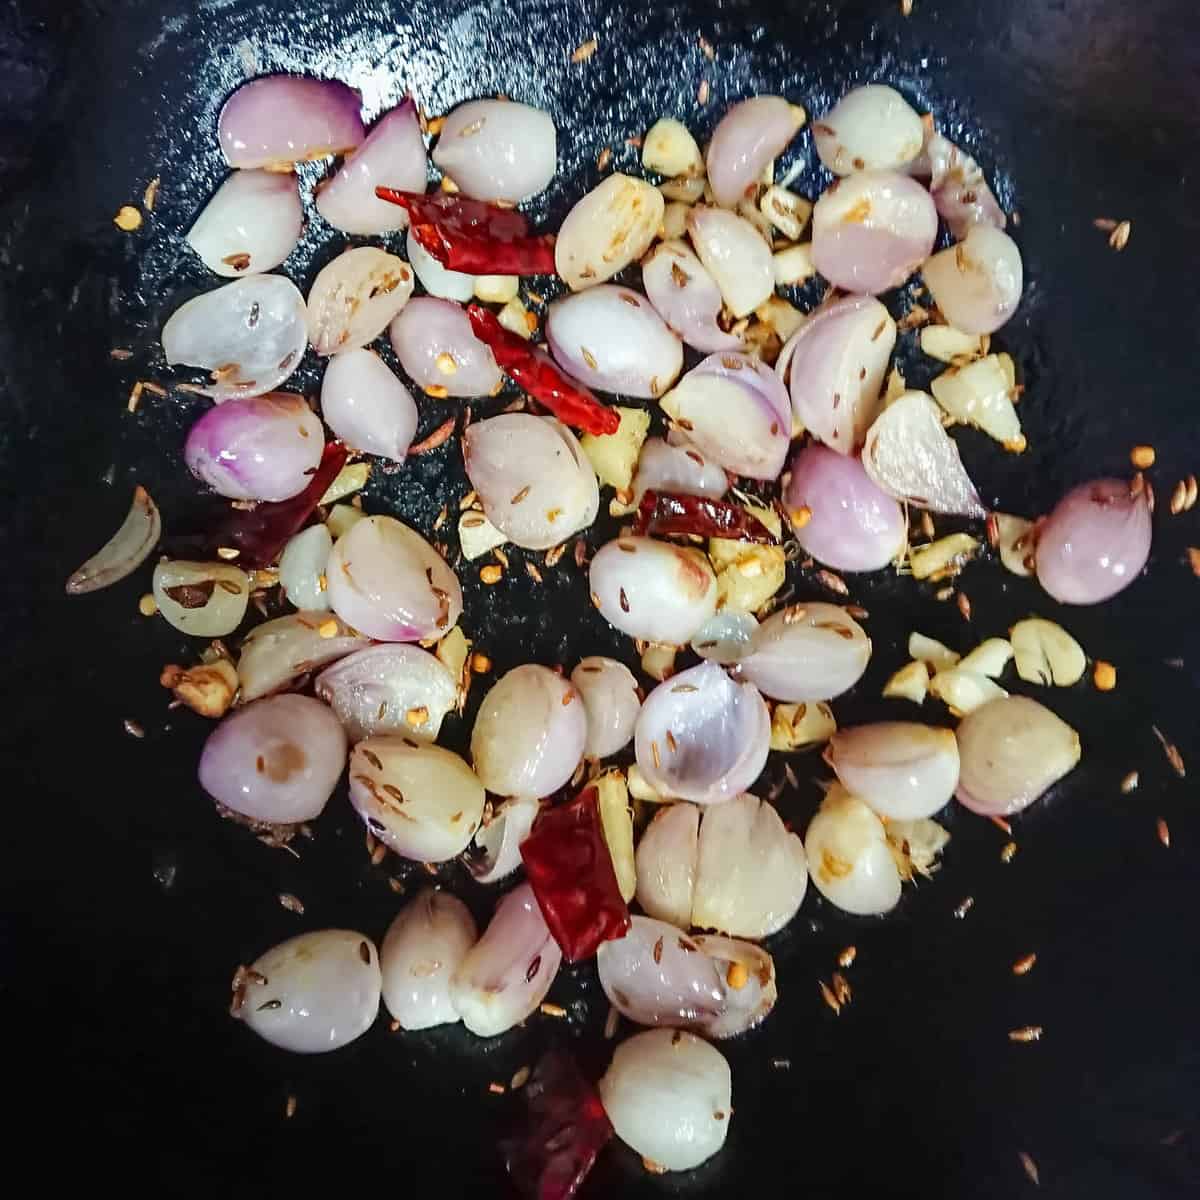 Shallots, chilies, cumin, garlic and ginger being sauteed in oil in a pan.